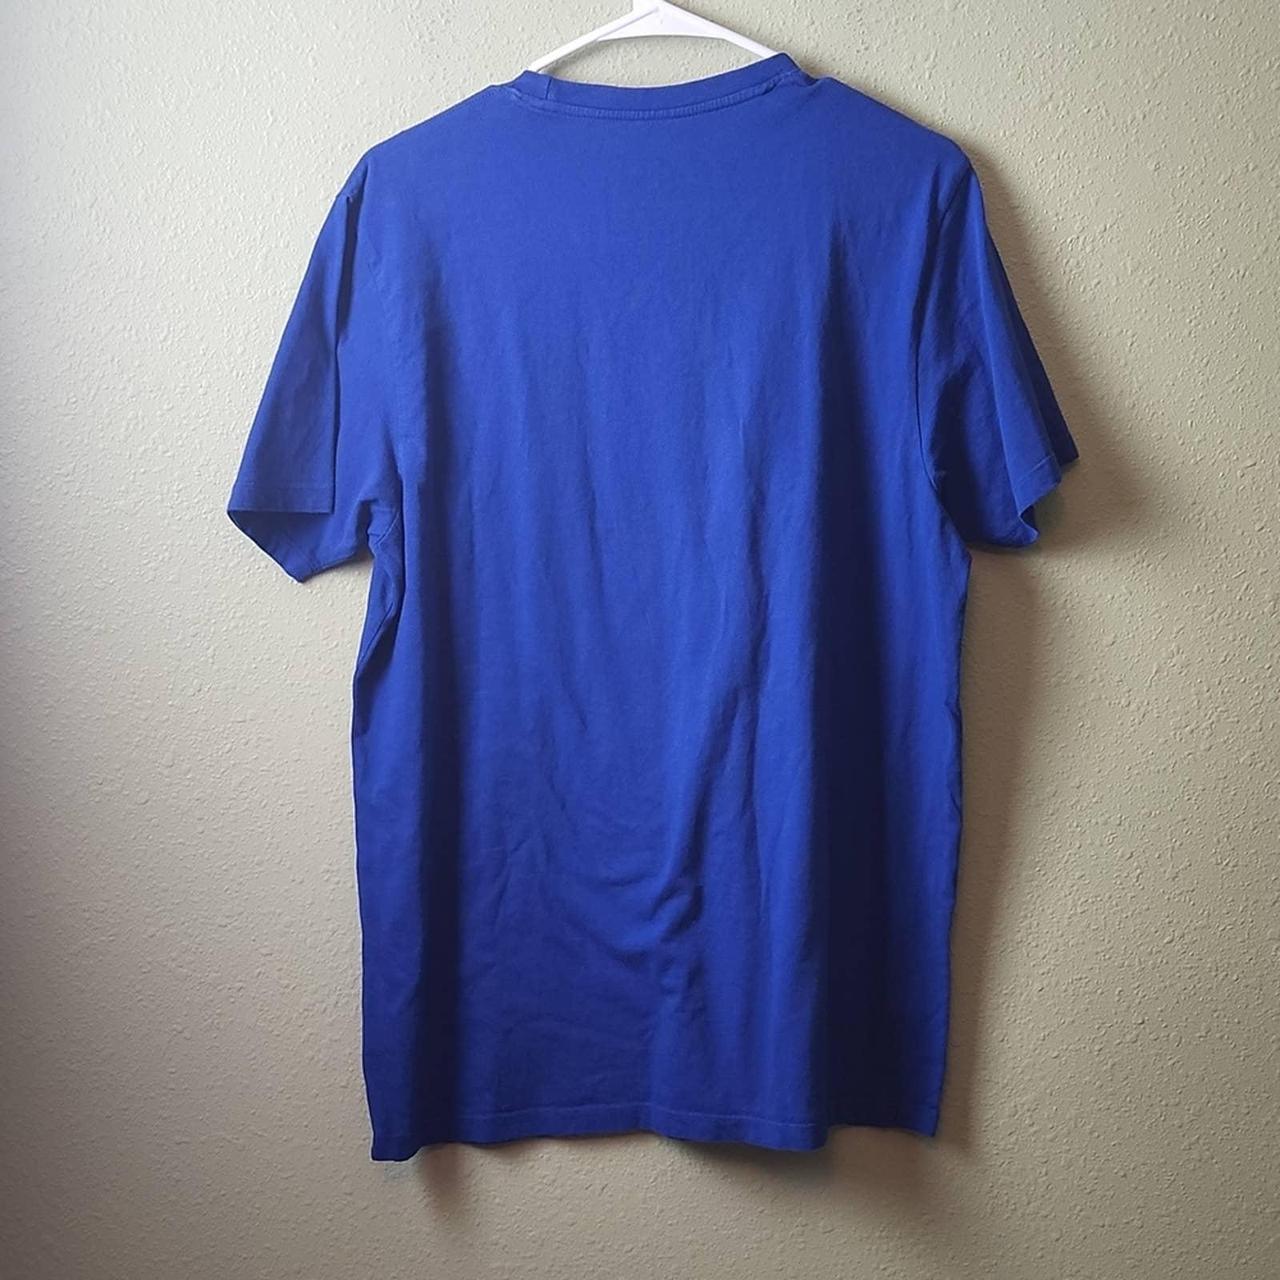 Size medium Chicago Cubs T-shirt by 47 brand. This - Depop